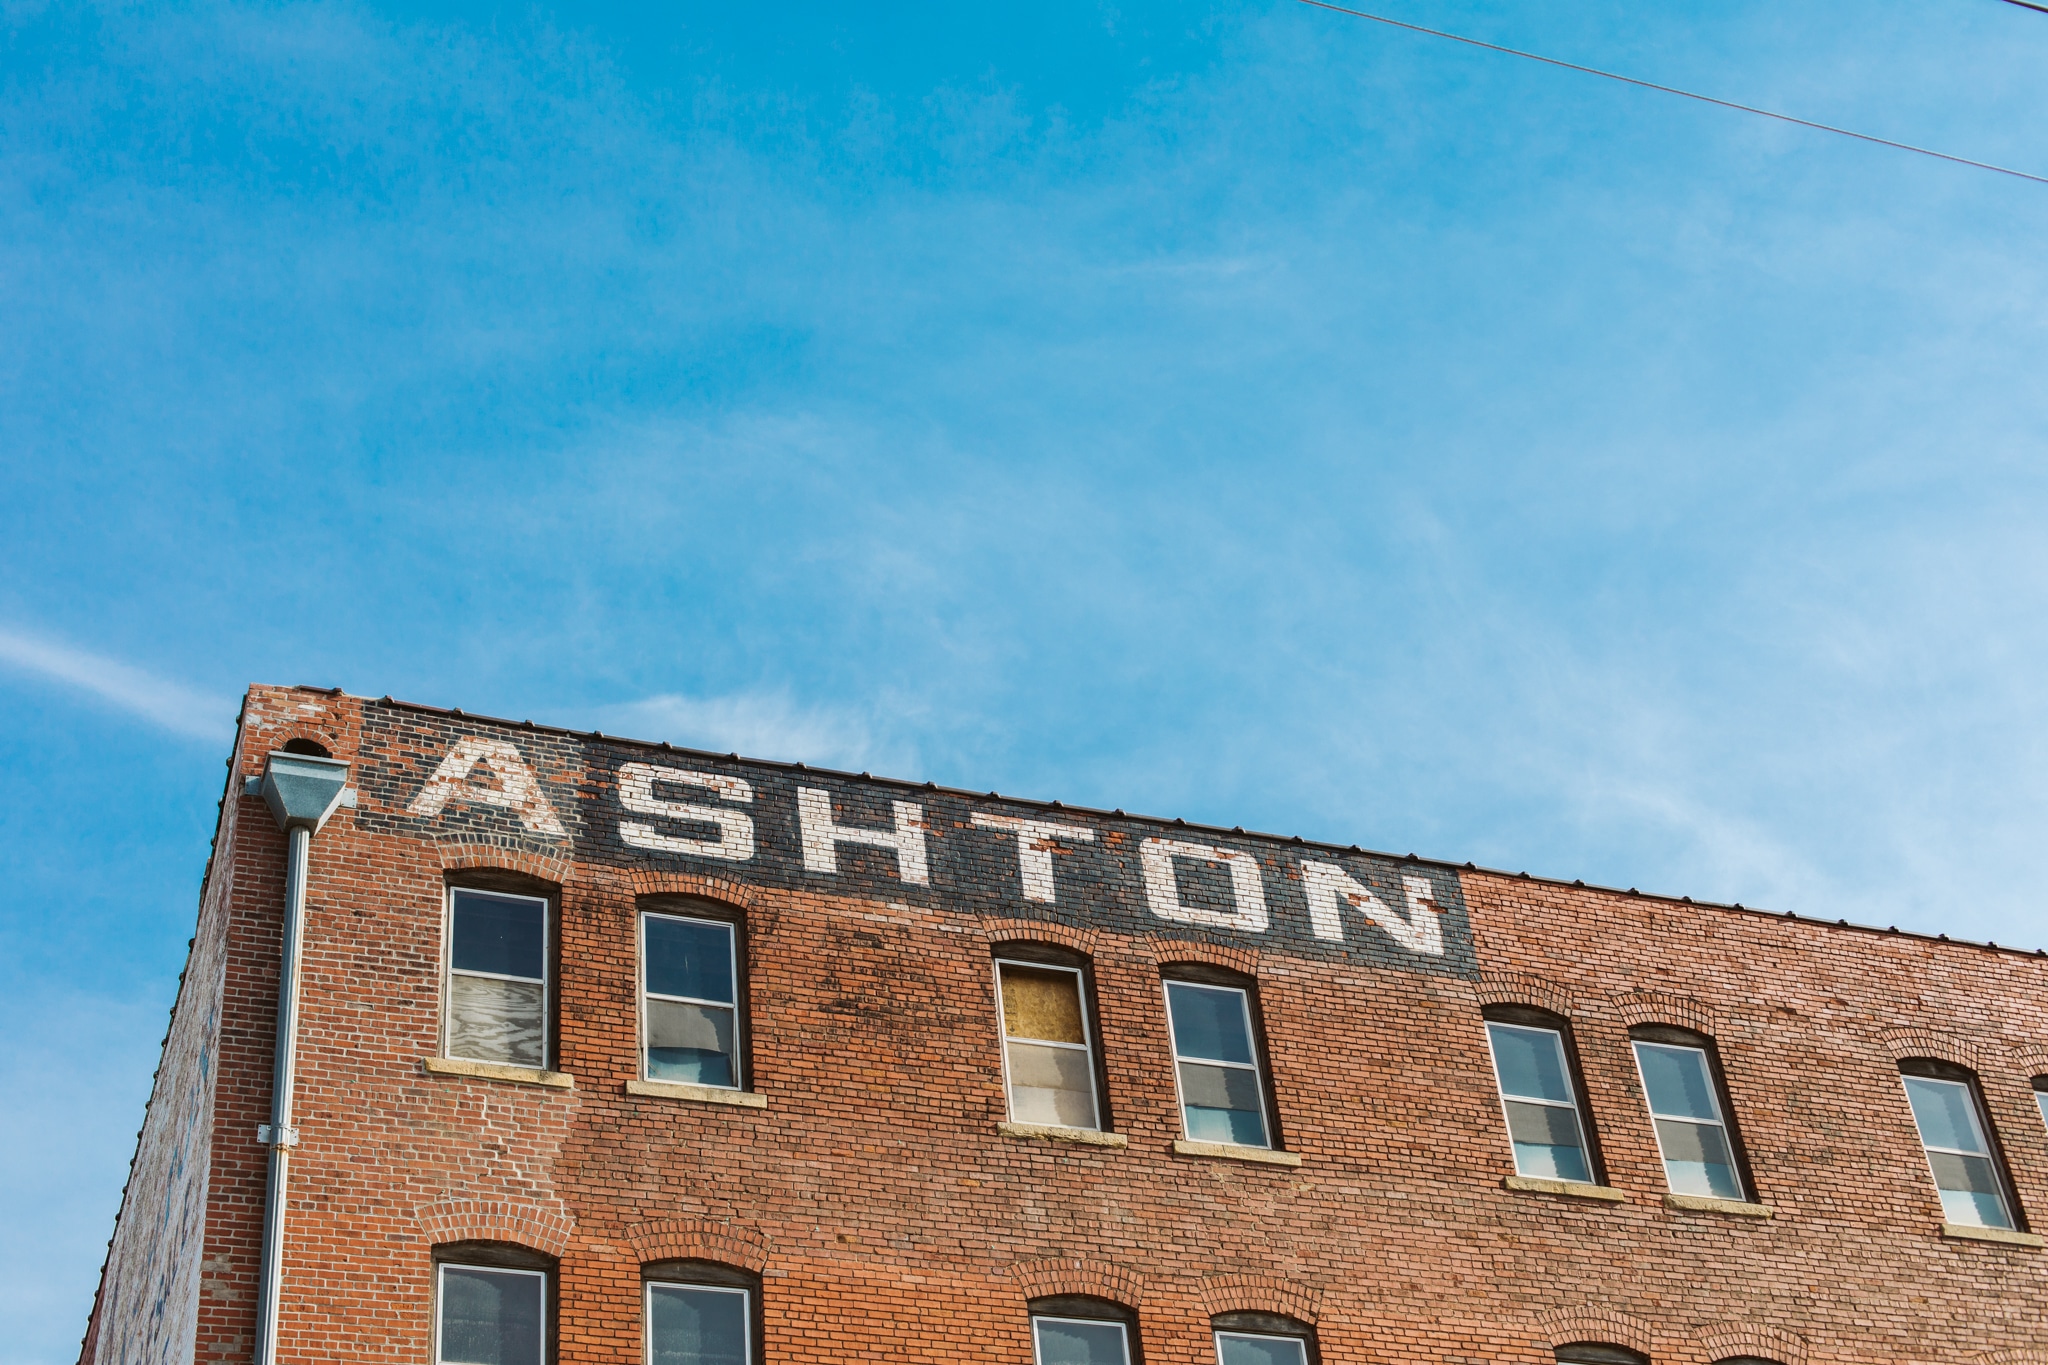 The brick exterior of the Ashton building. The word 